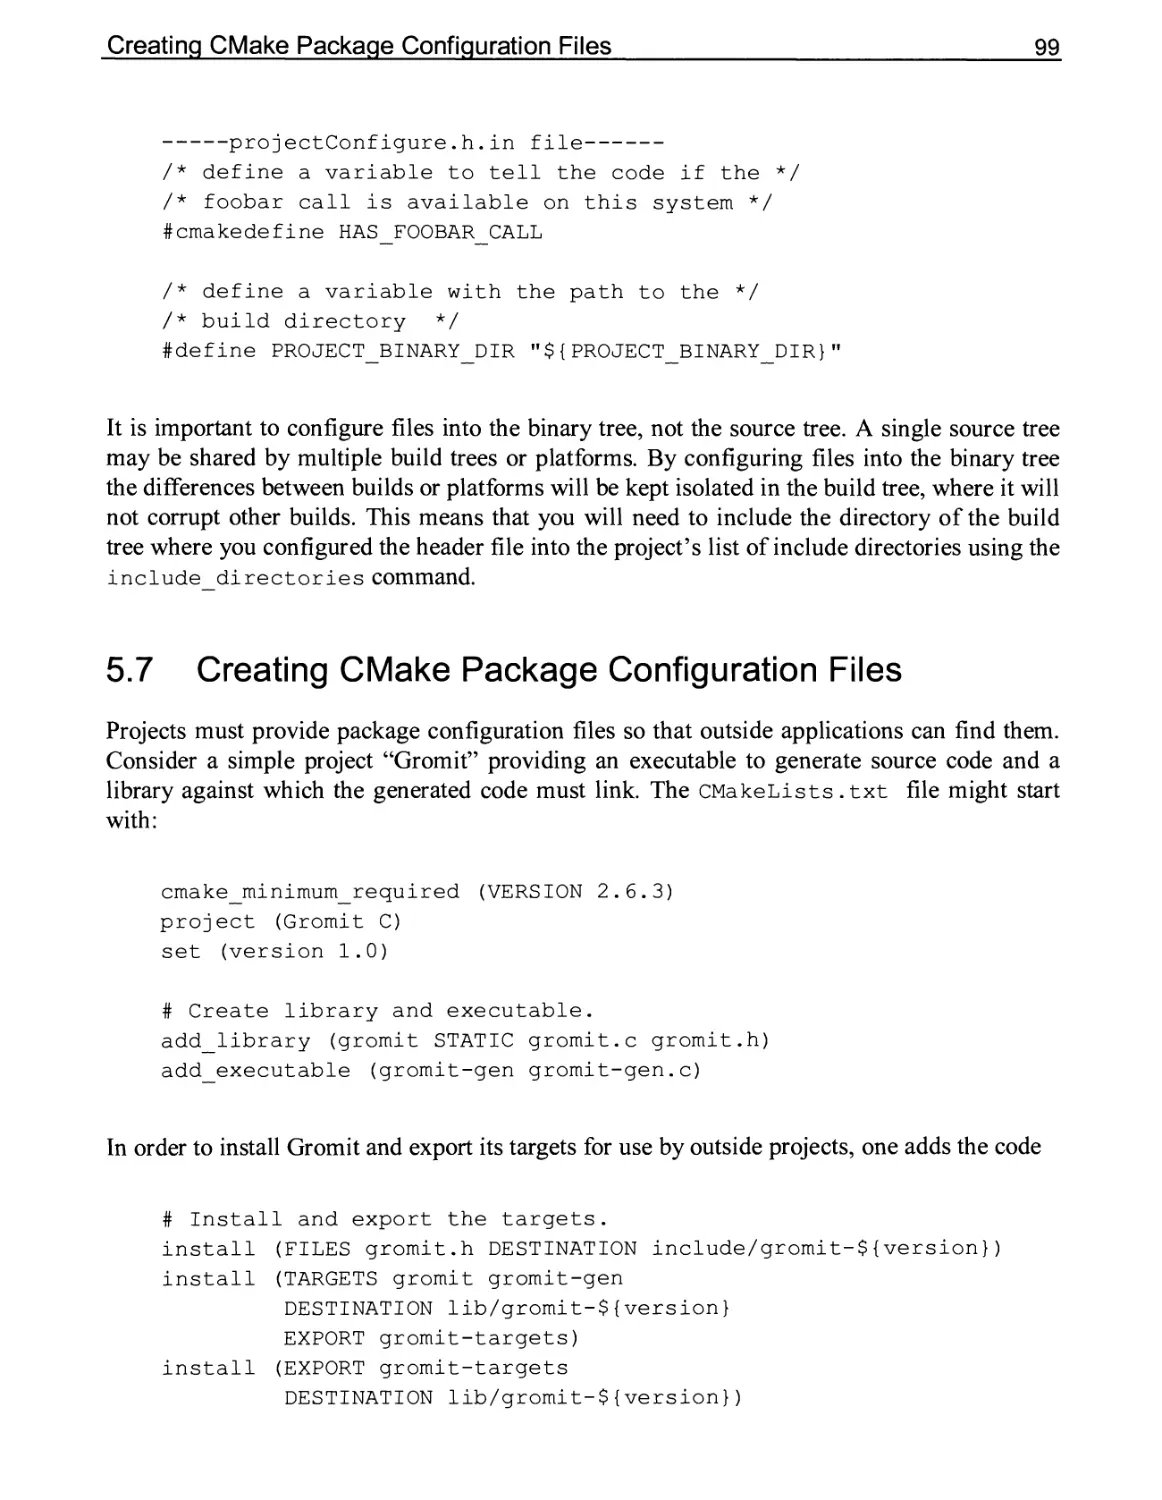 5.7 Creating CMake Package Configuration Files